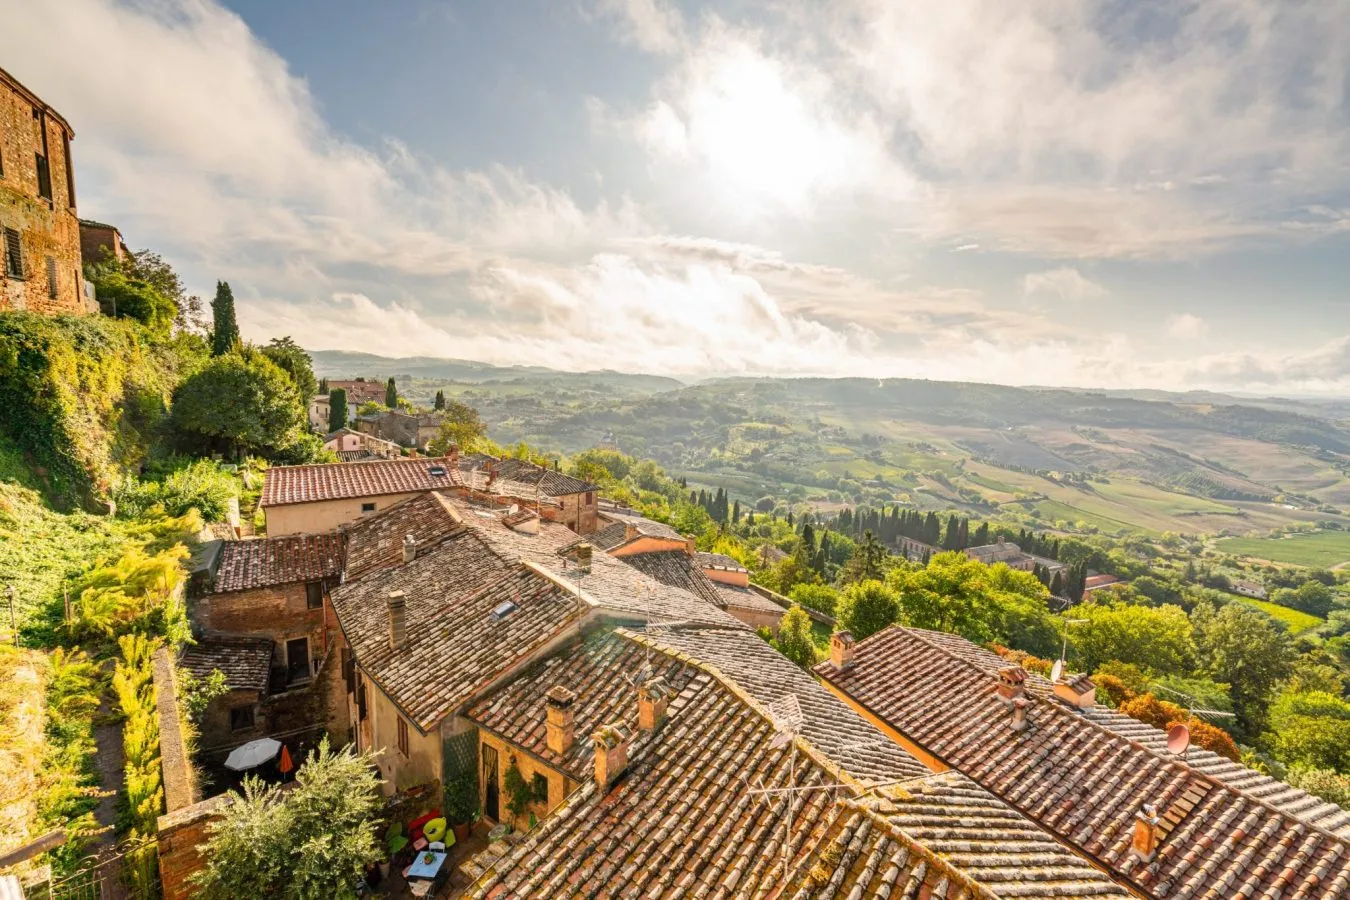 View of the countryside from the edge of Montepulciano, an excellent stop on any Tuscany itinerary!